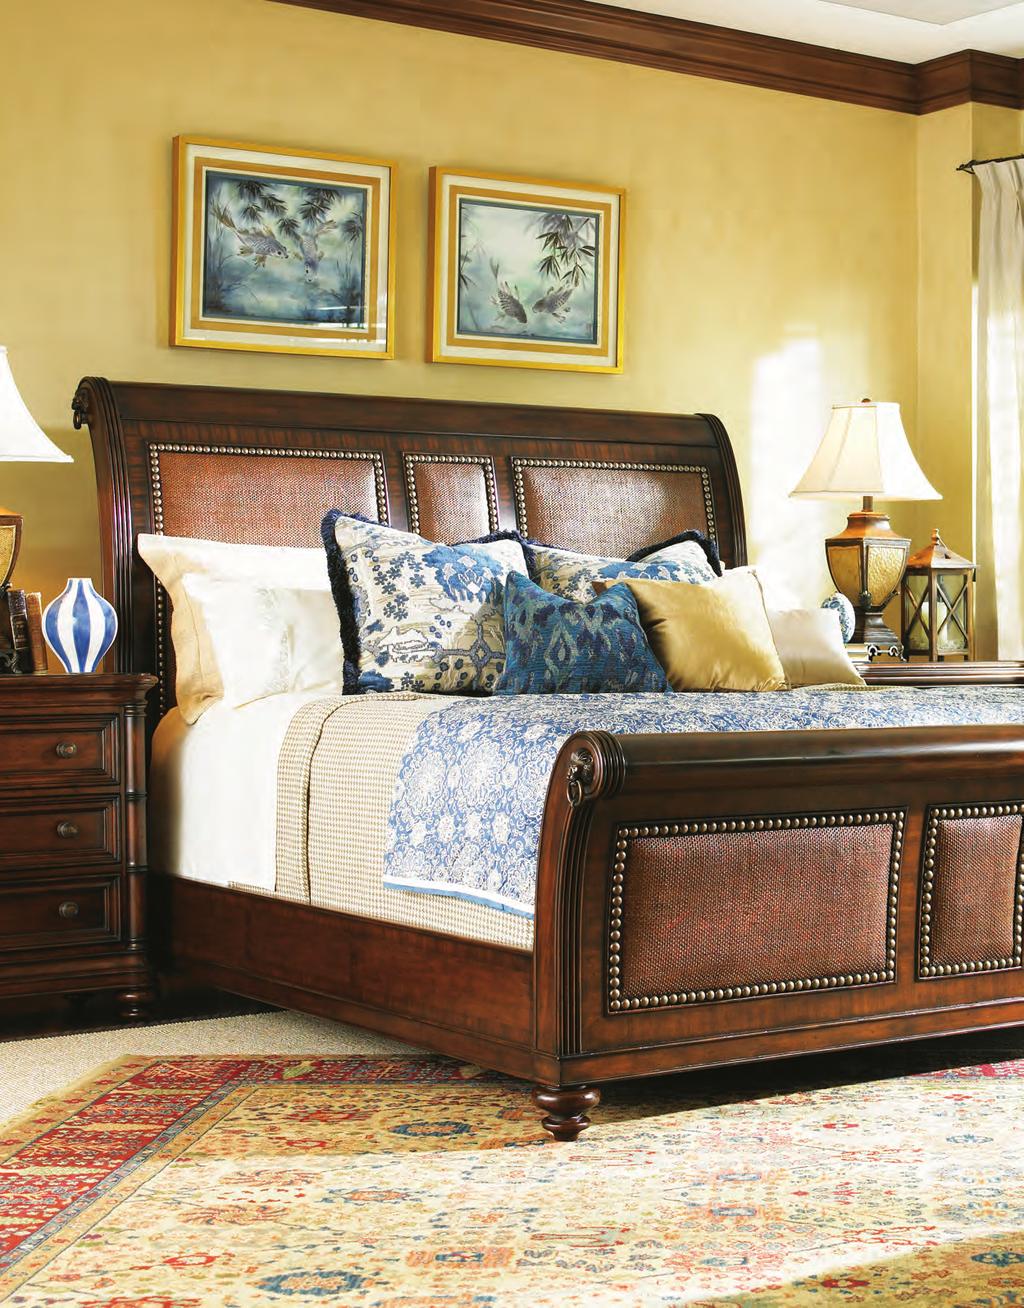 The classic Palmera sleigh bed makes an